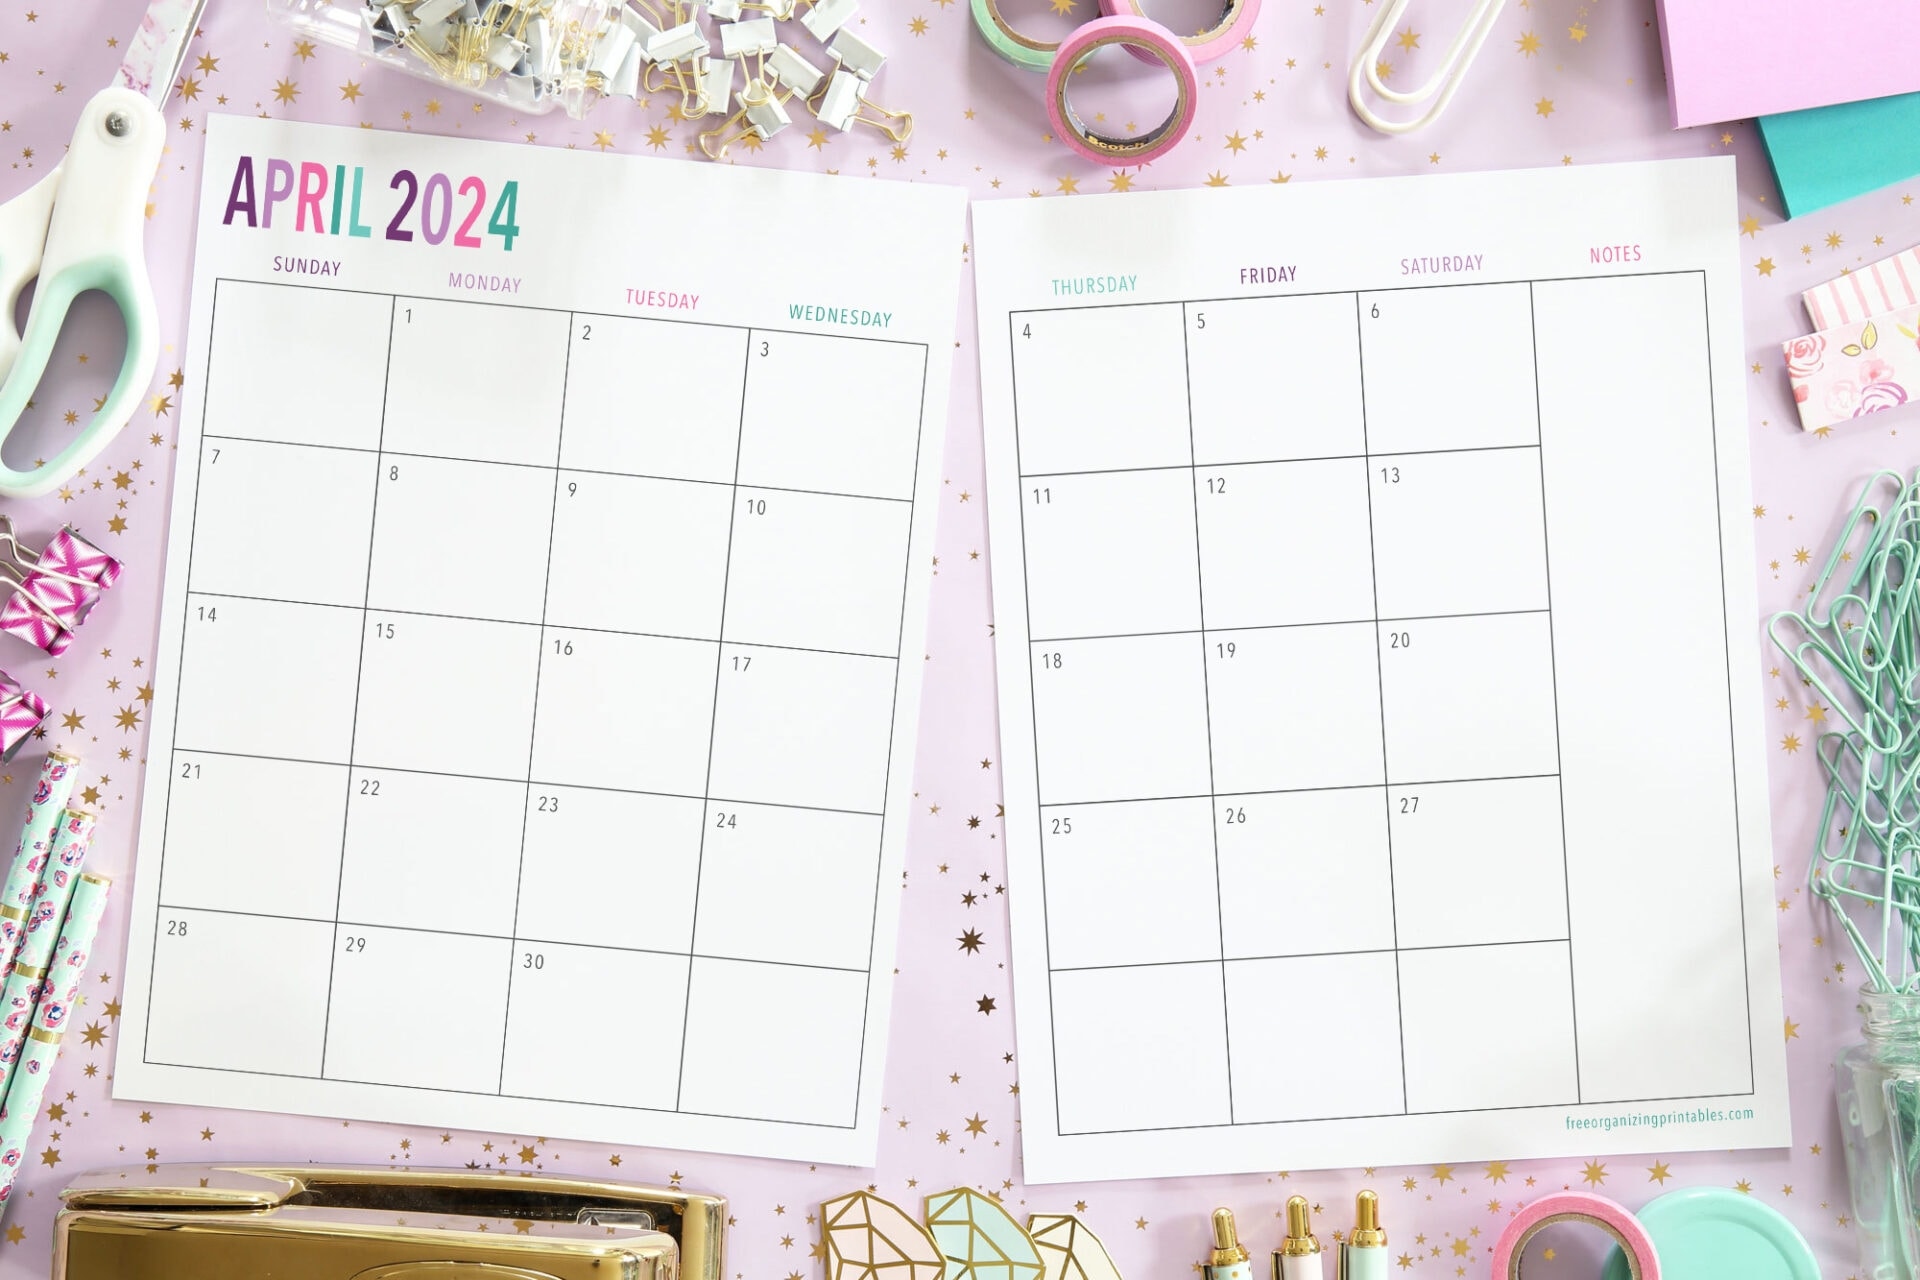 Free Printable 2 Page Blank Monthly Calendar 2024 inside Free Printable Calendar 2024 2 Page